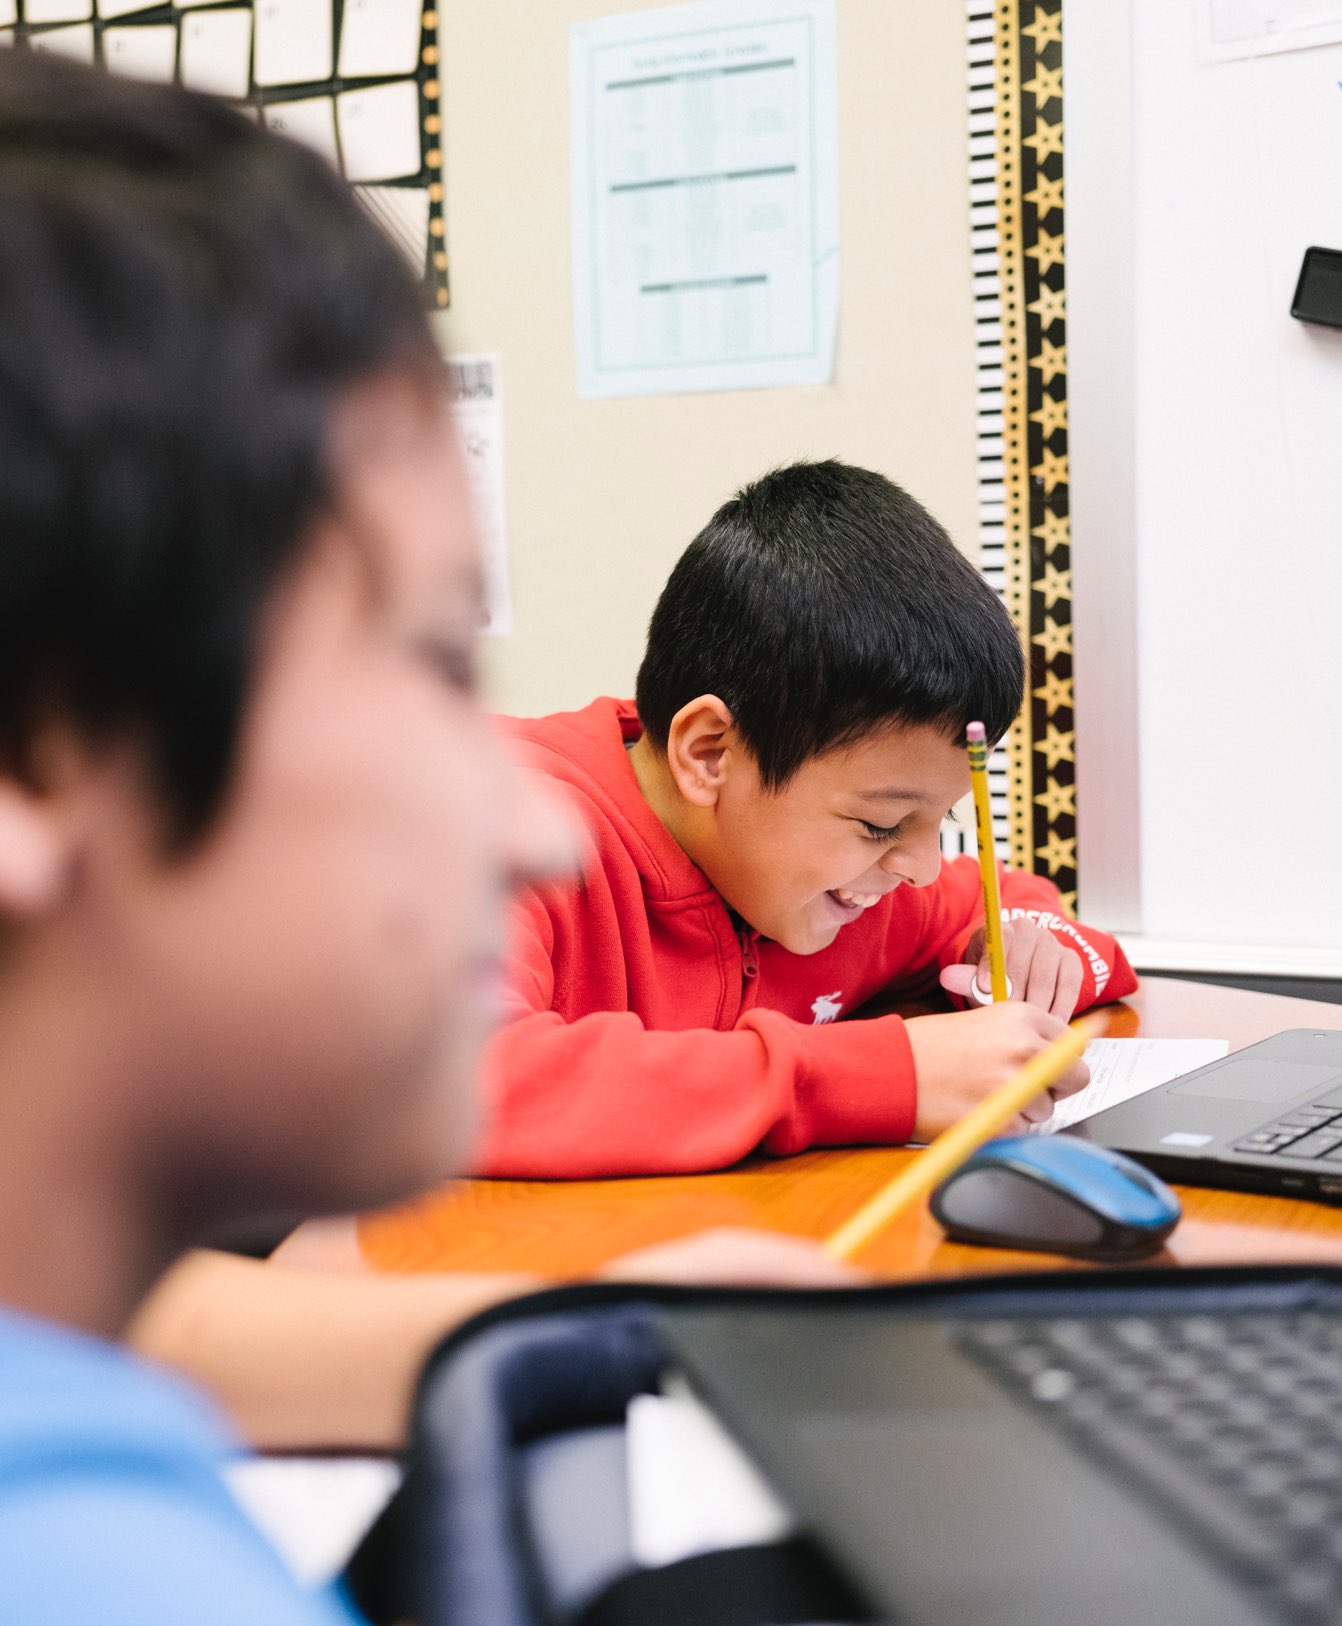 Two boys with pencils and laptop computers work together on their Summit Learning project at Bondy Intermediate School in Pasadena, Texas (Education, CZI).